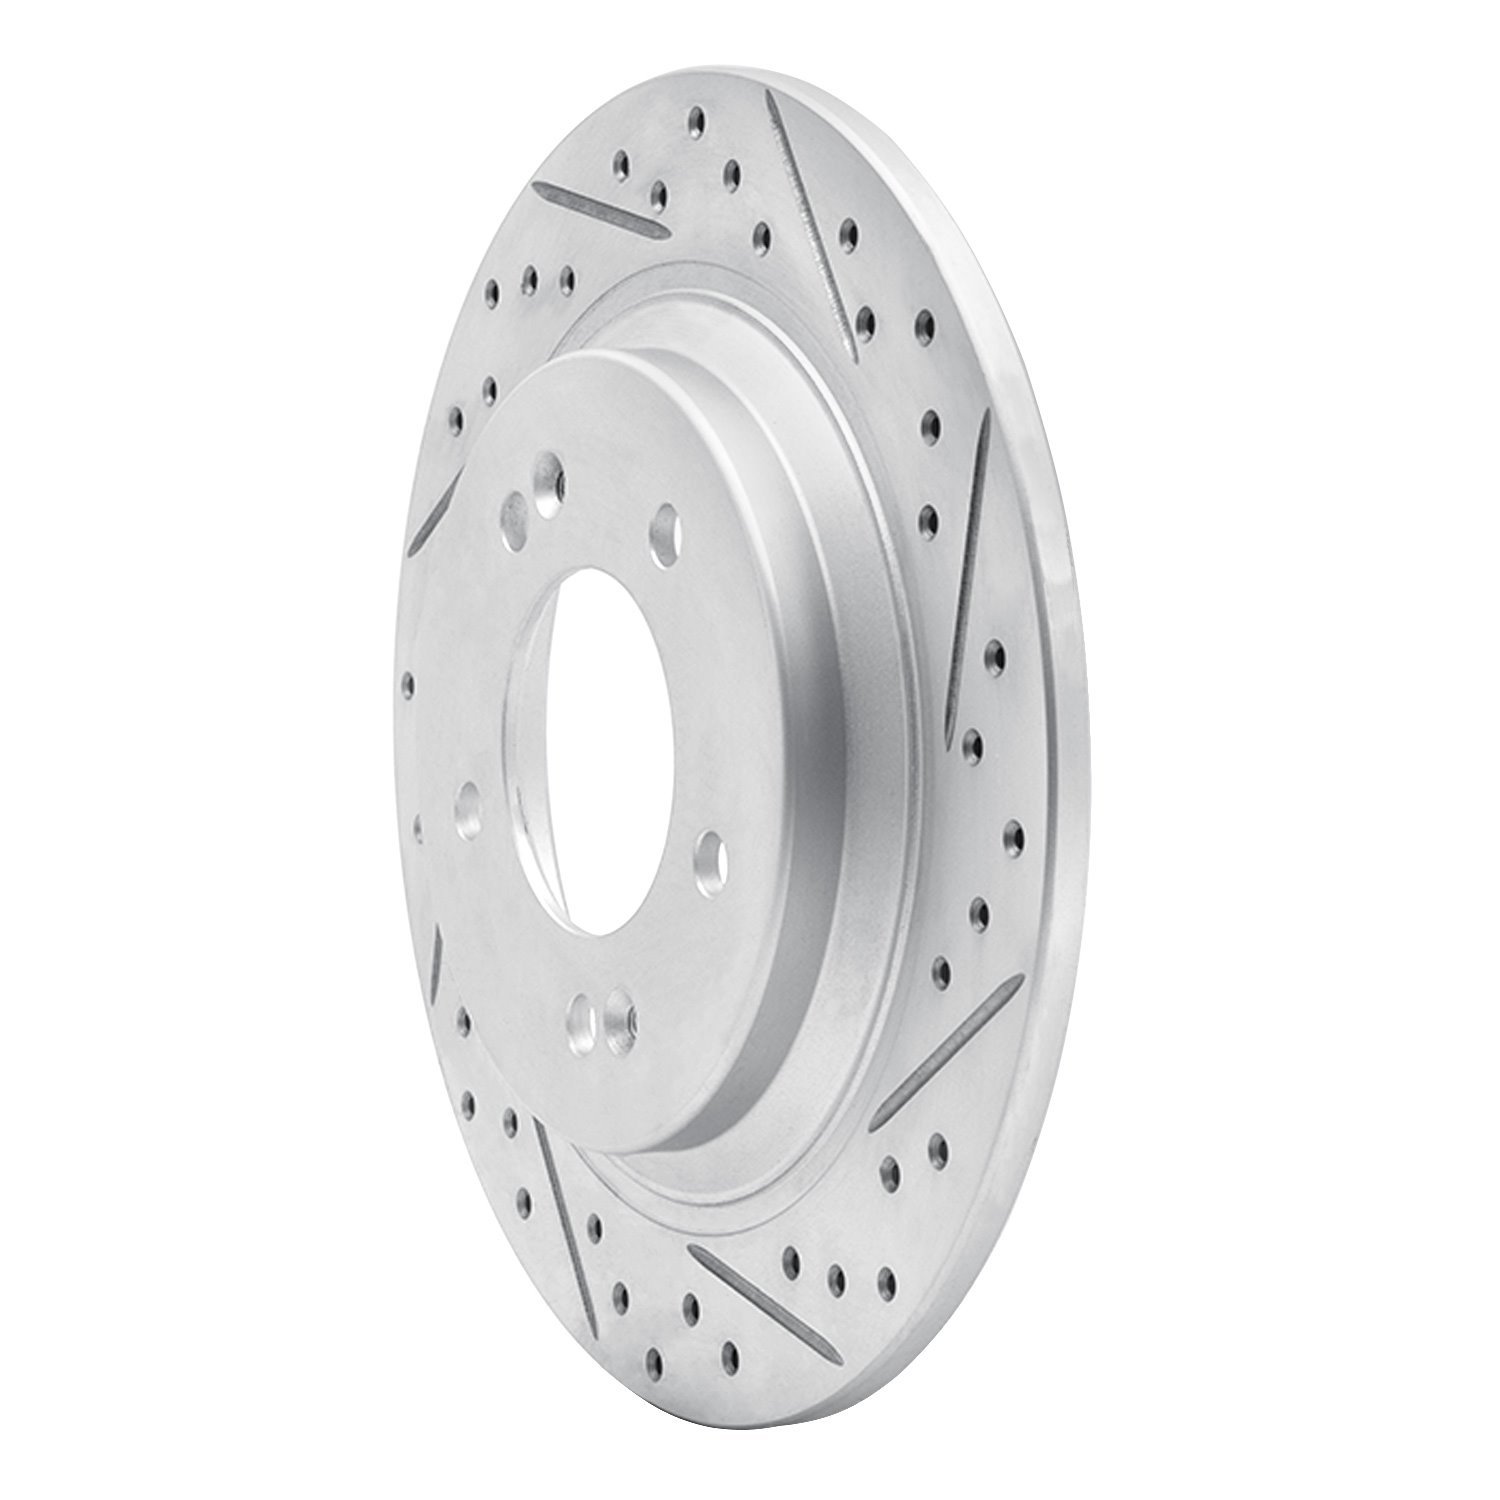 830-21014R Geoperformance Drilled/Slotted Brake Rotor, Fits Select Kia/Hyundai/Genesis, Position: Rear Right